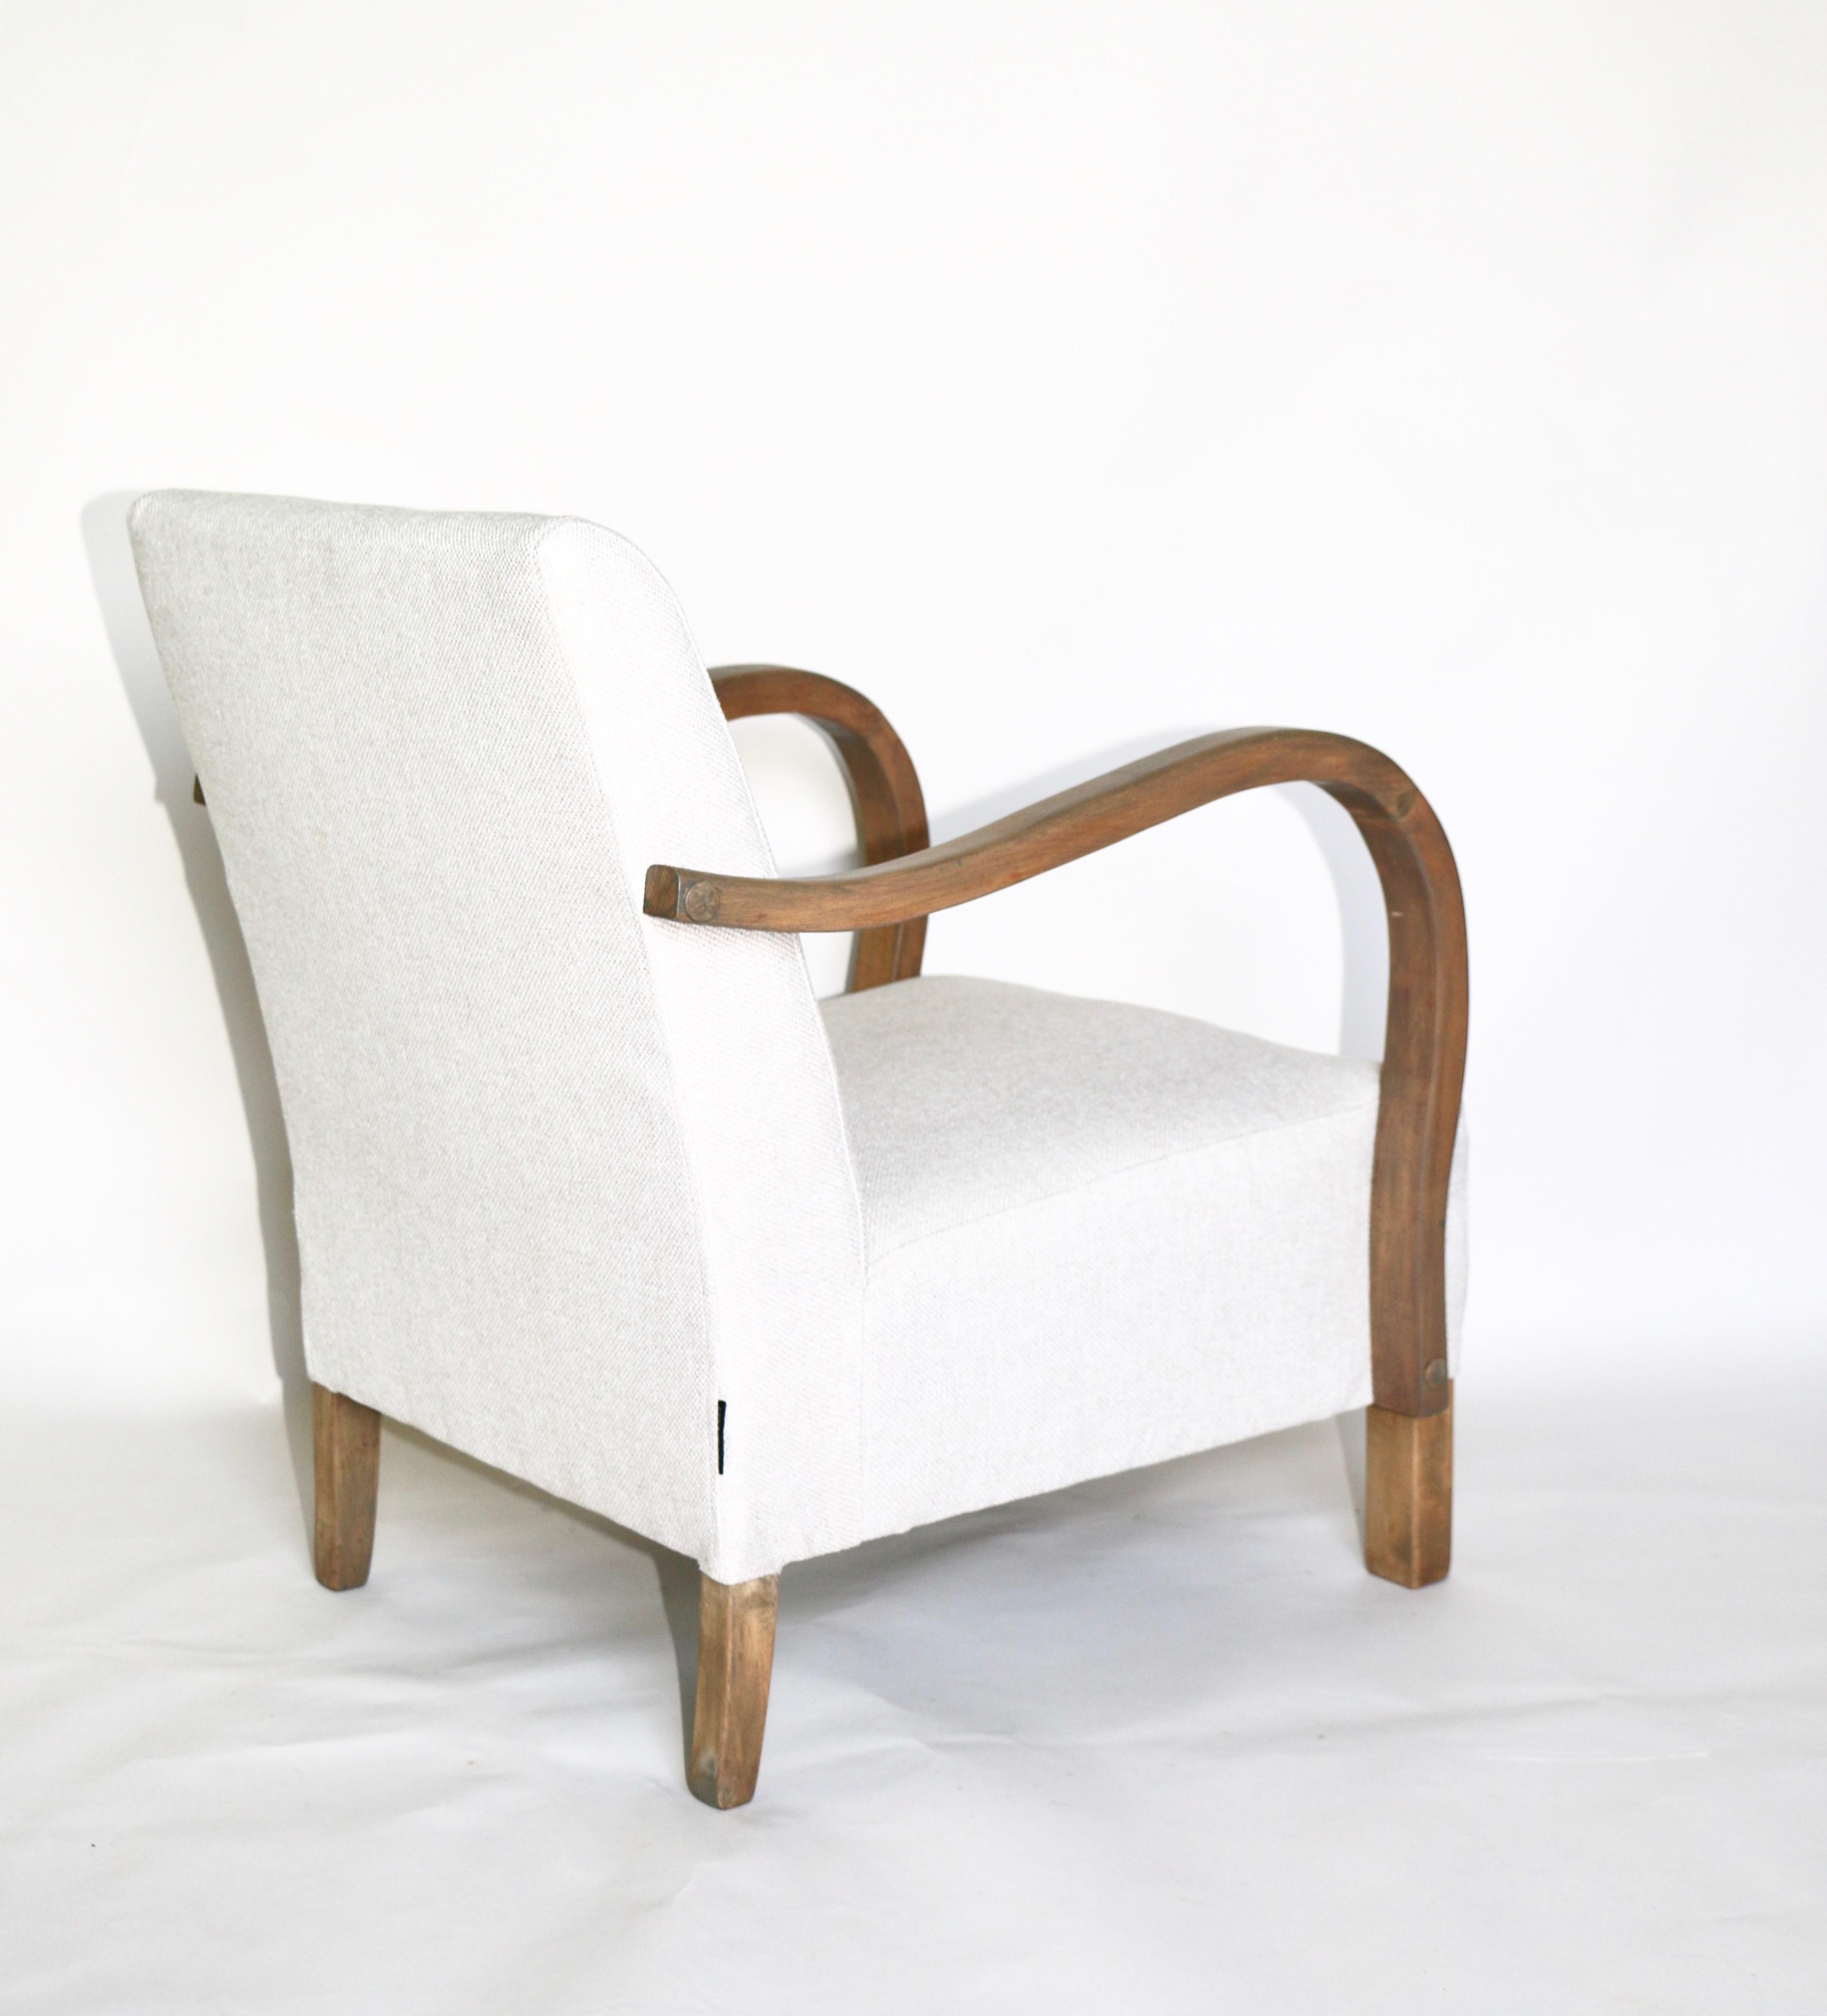 Polish Art Deco Armchair in beige from 20th Century For Sale